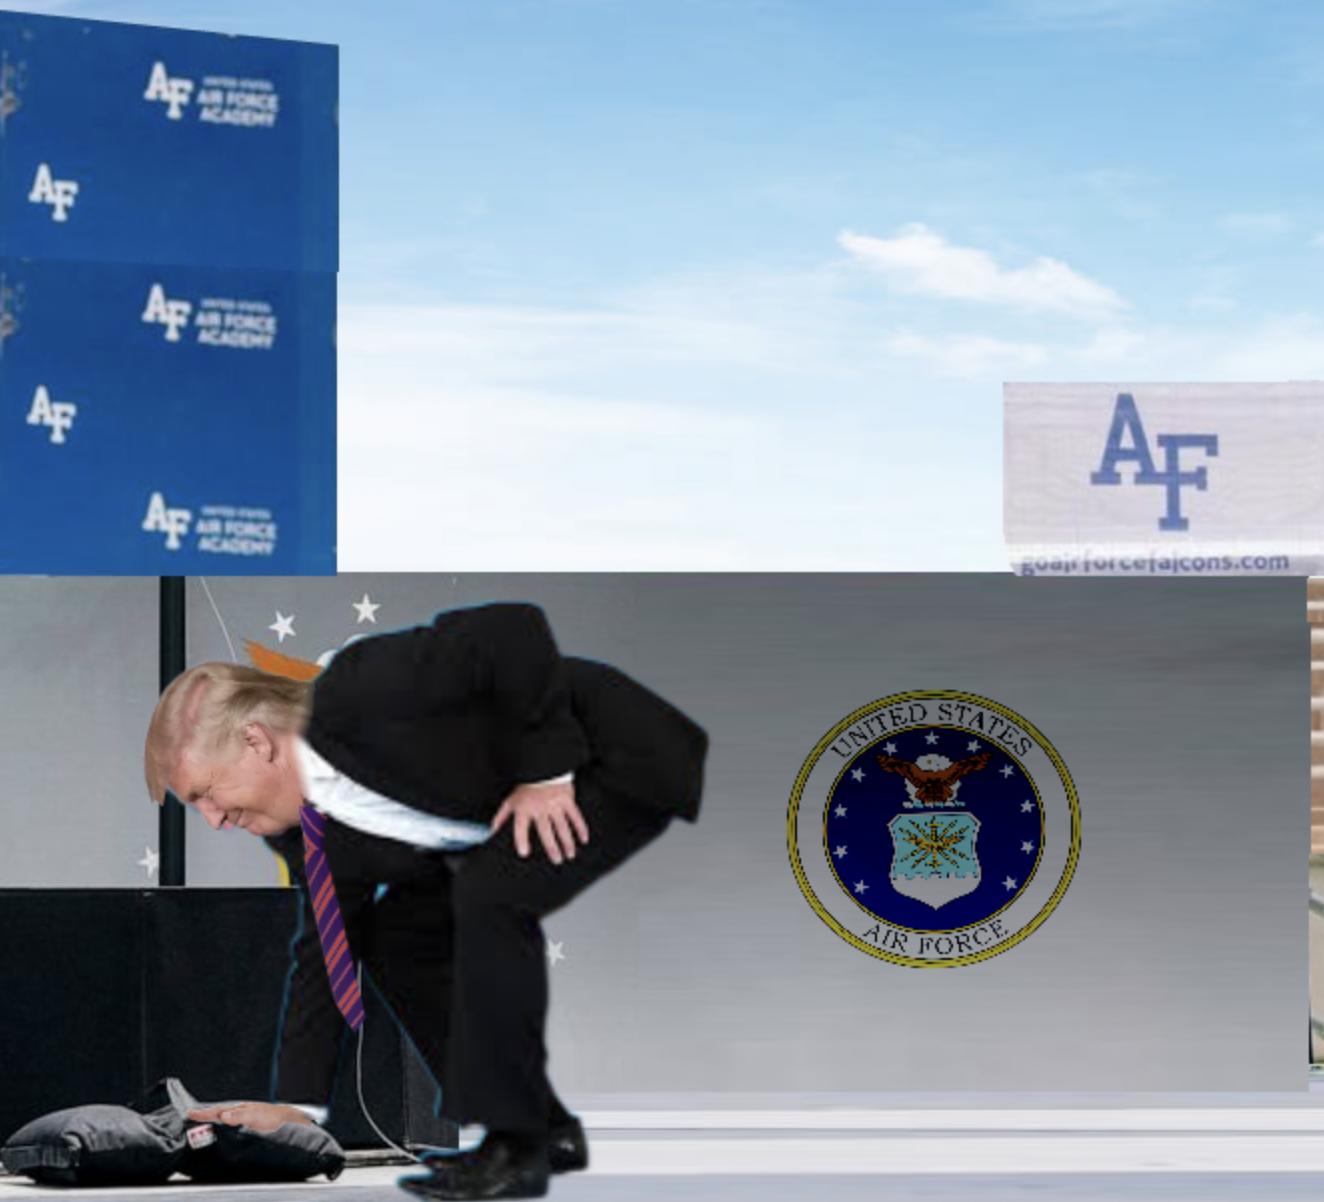 Biden's Fall Photoshop battle -= air force seal - Af Af Api Ap Ap Ar For Ar Force Acade Air Force Intle States Af cons.com